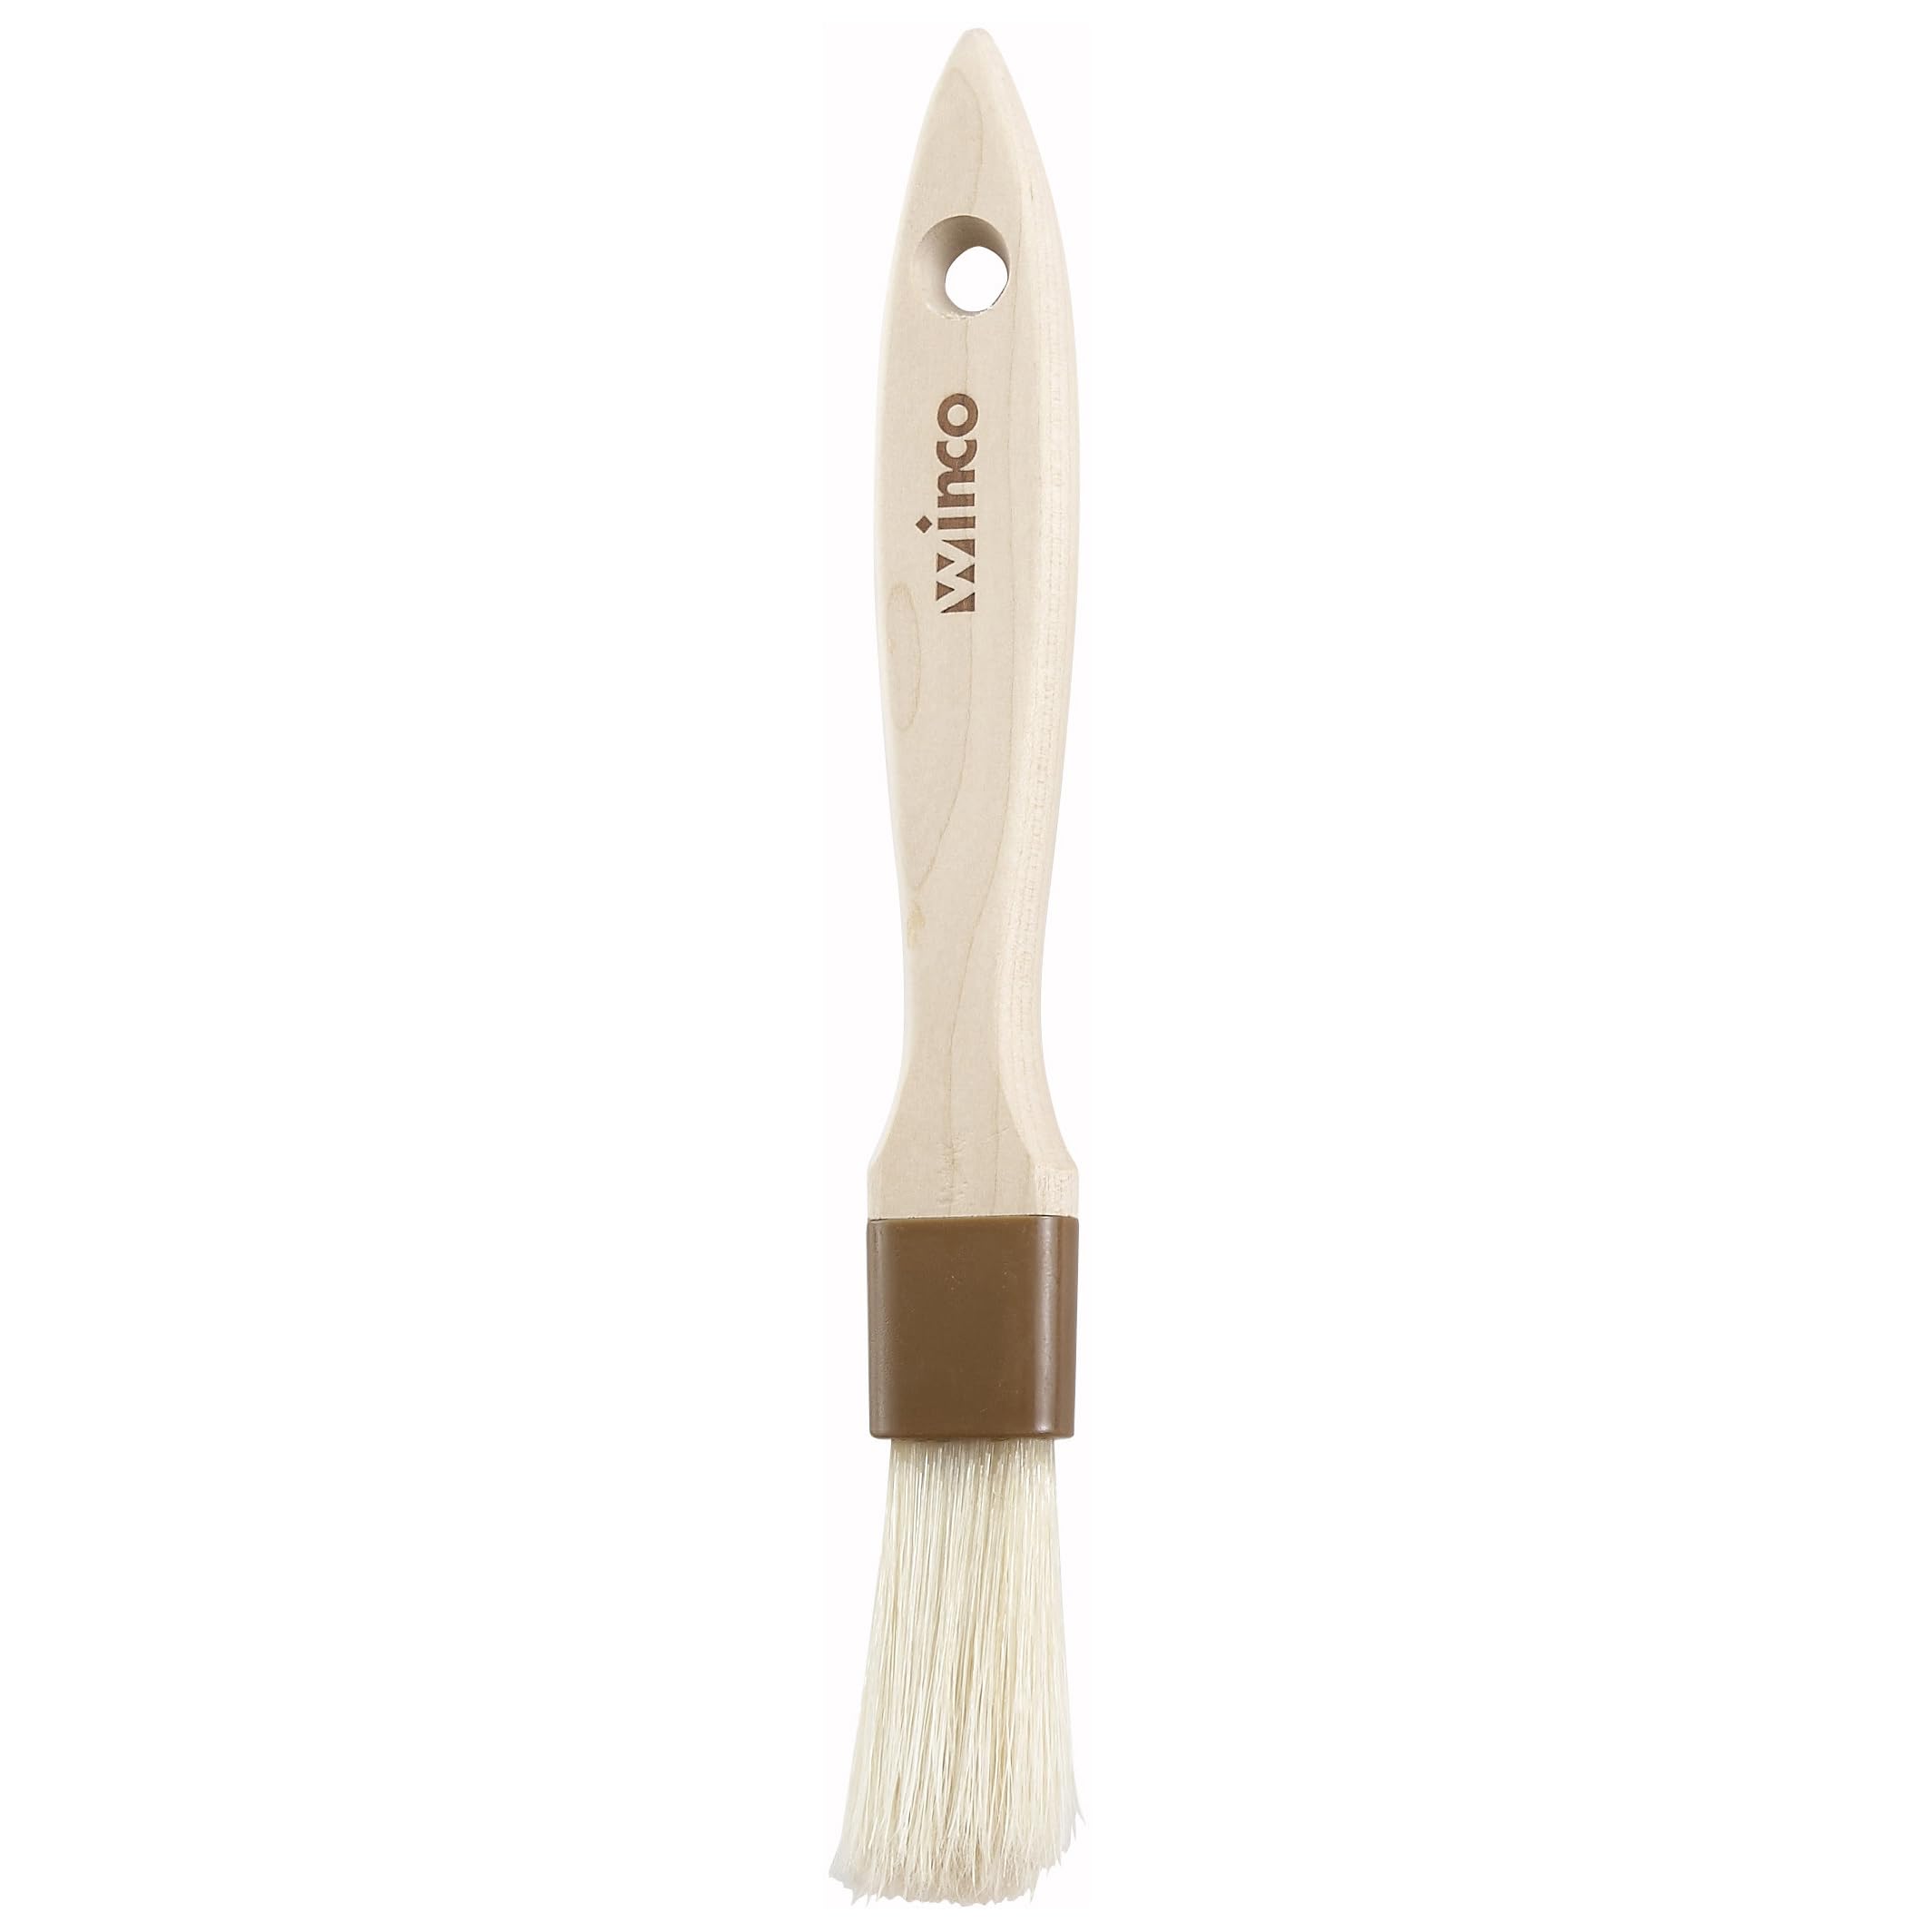 Winco Flat Pastry and Basting Brush, 1-Inch